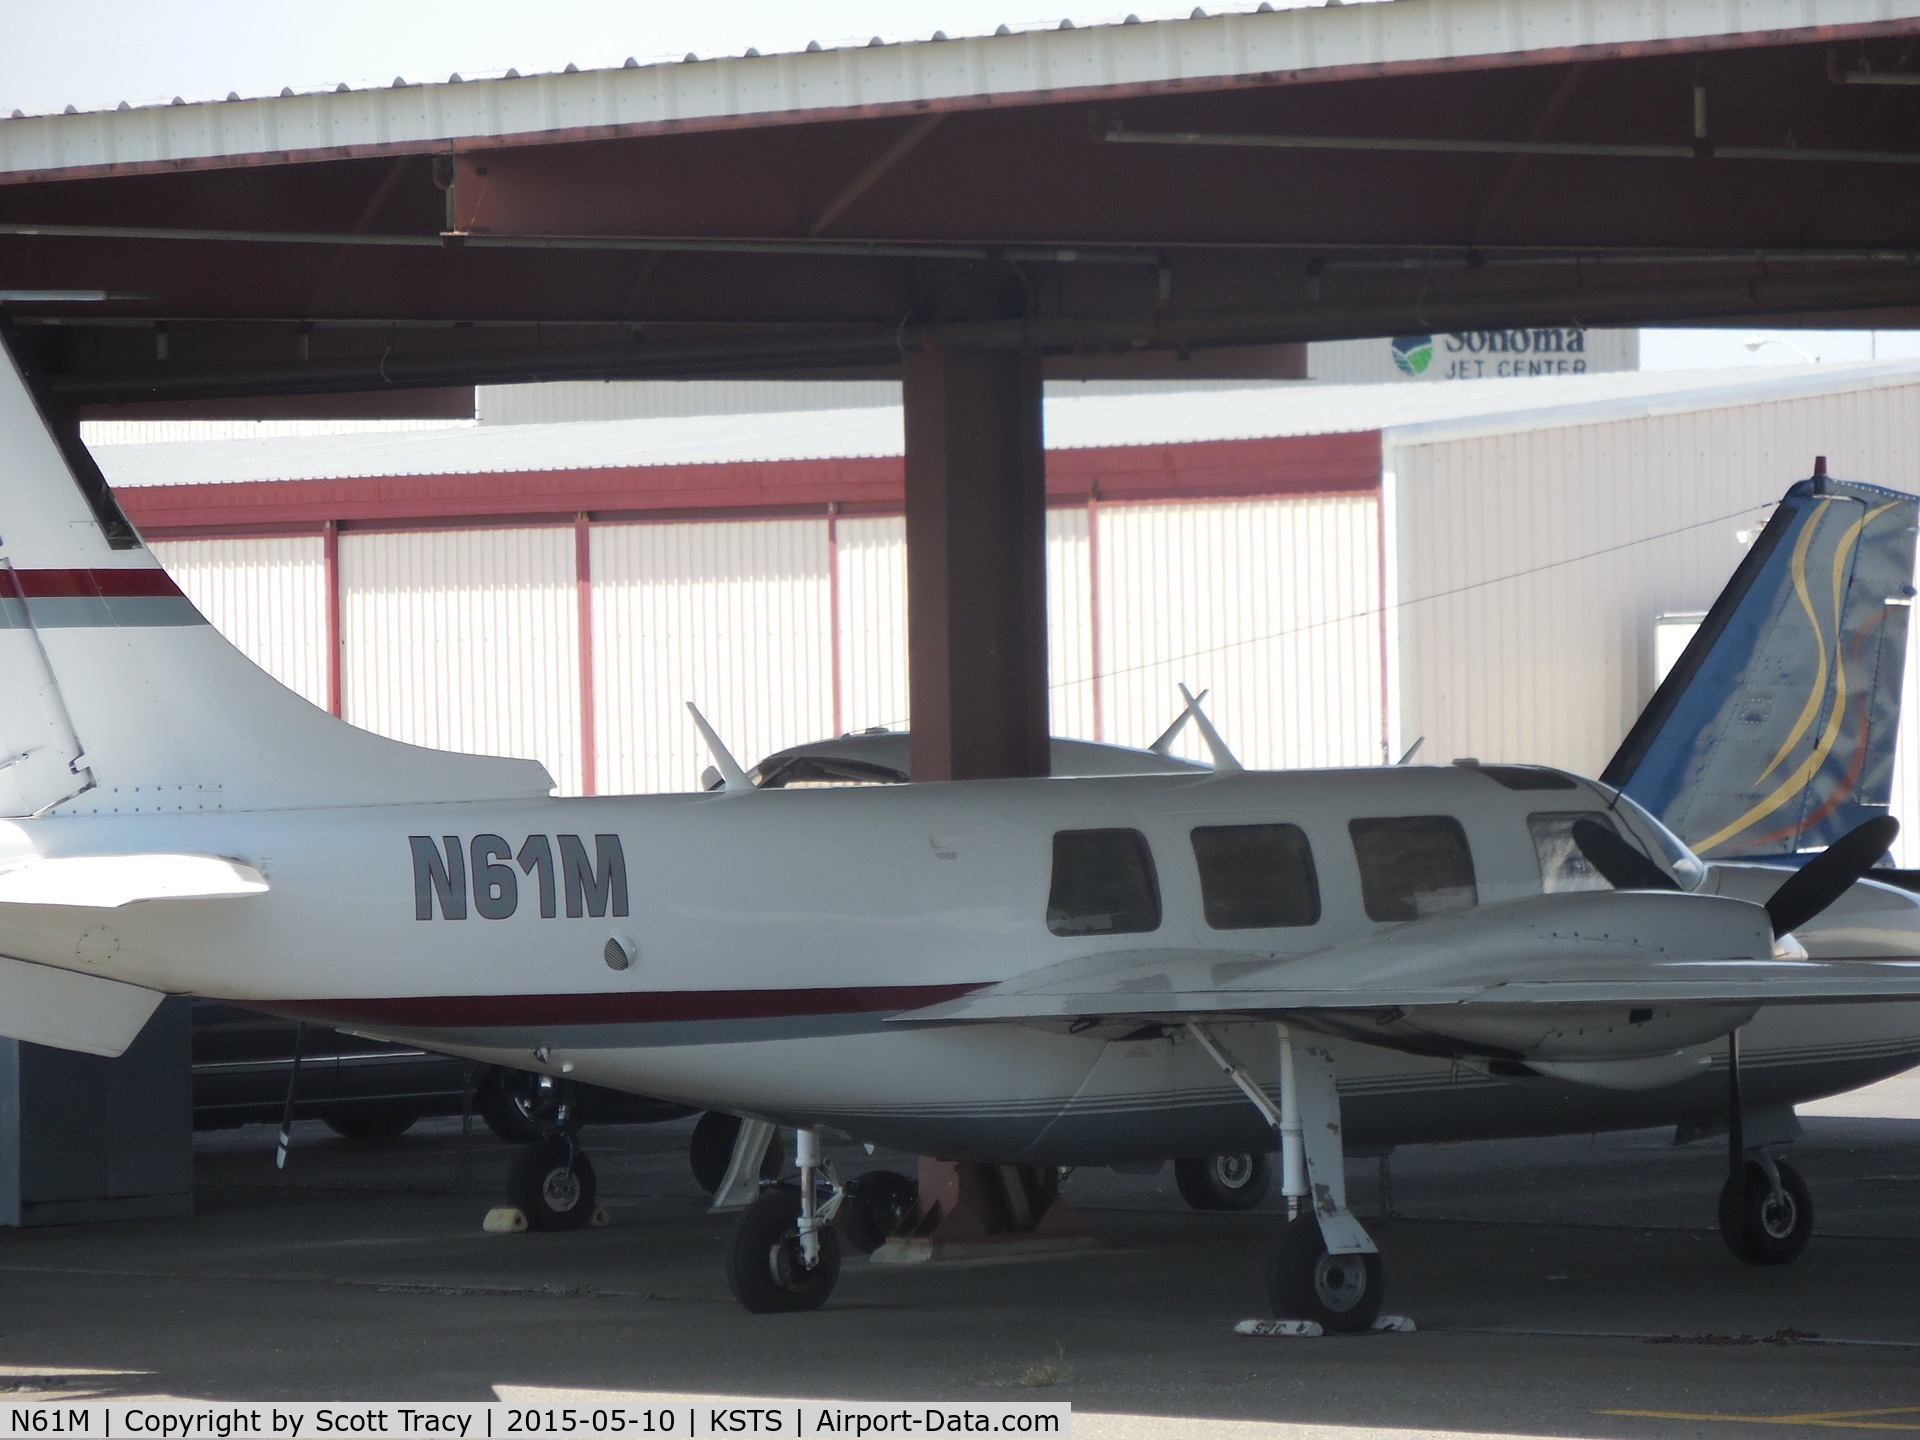 N61M, 1977 Smith Aerostar 601P C/N 61P-0414-148, I have never seen this plane before